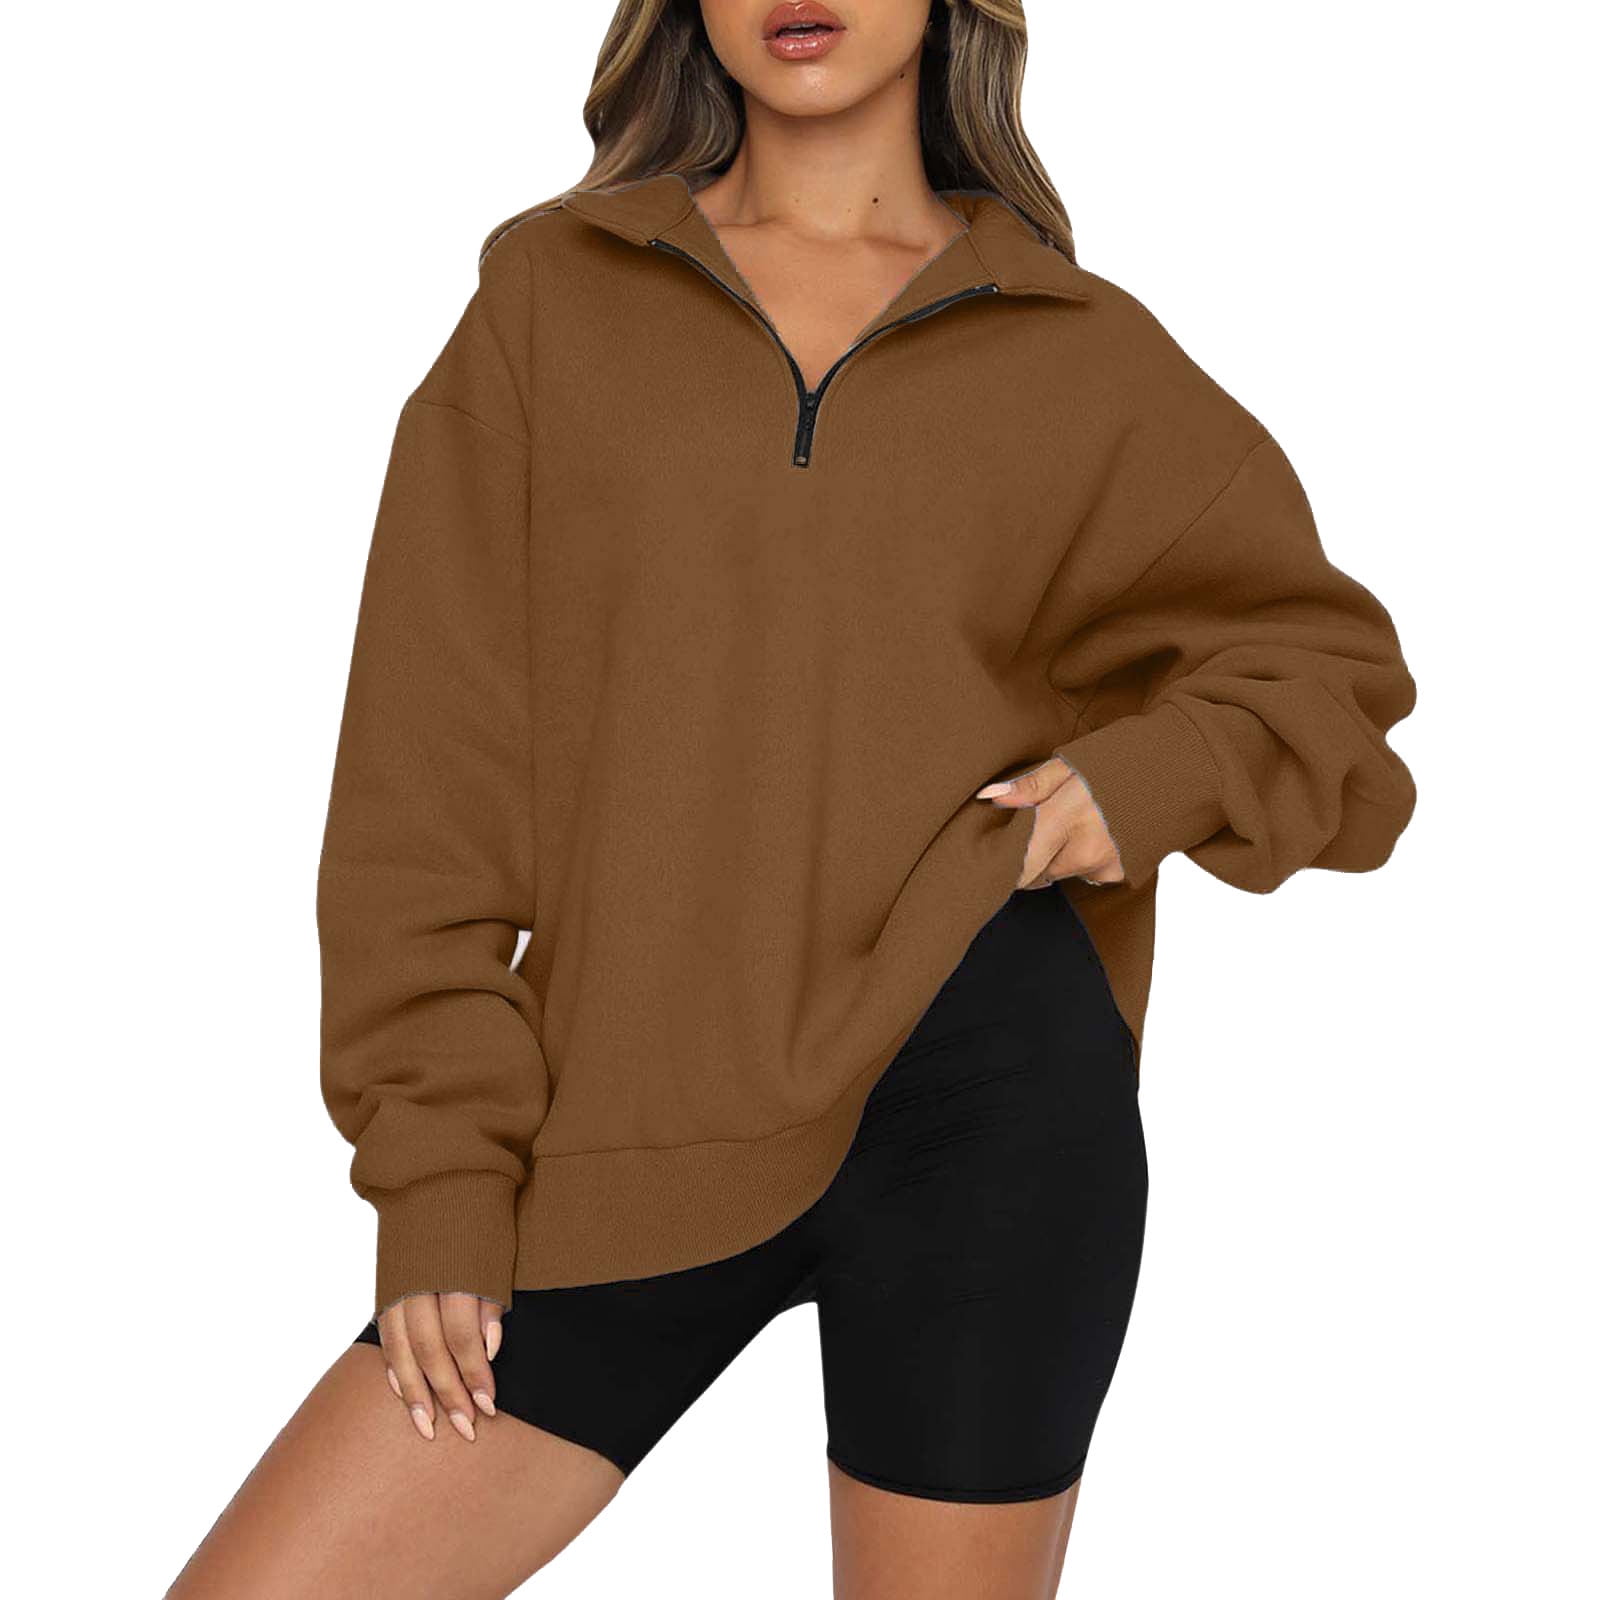 Tarmeek Fashion Oversized Sweatshirt Womens Athletic Workout Hoodies Half  Zipper Pullover Long Sleeve with Thumbhole Relaxed Fit Hoodie